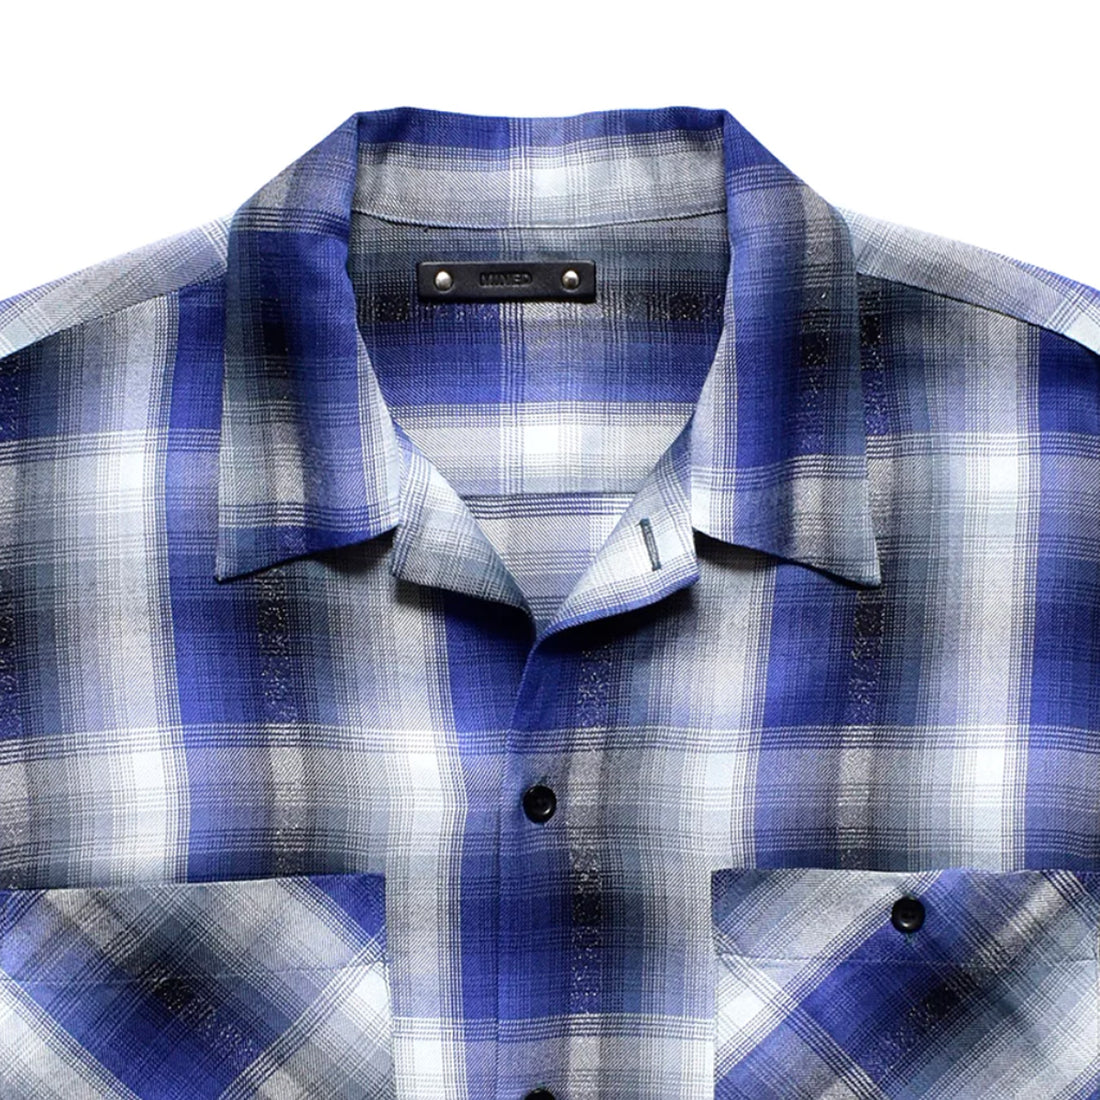 [MINEDENIM]Lame Ombre Check Loose Work SH/BPT(2308-5001)